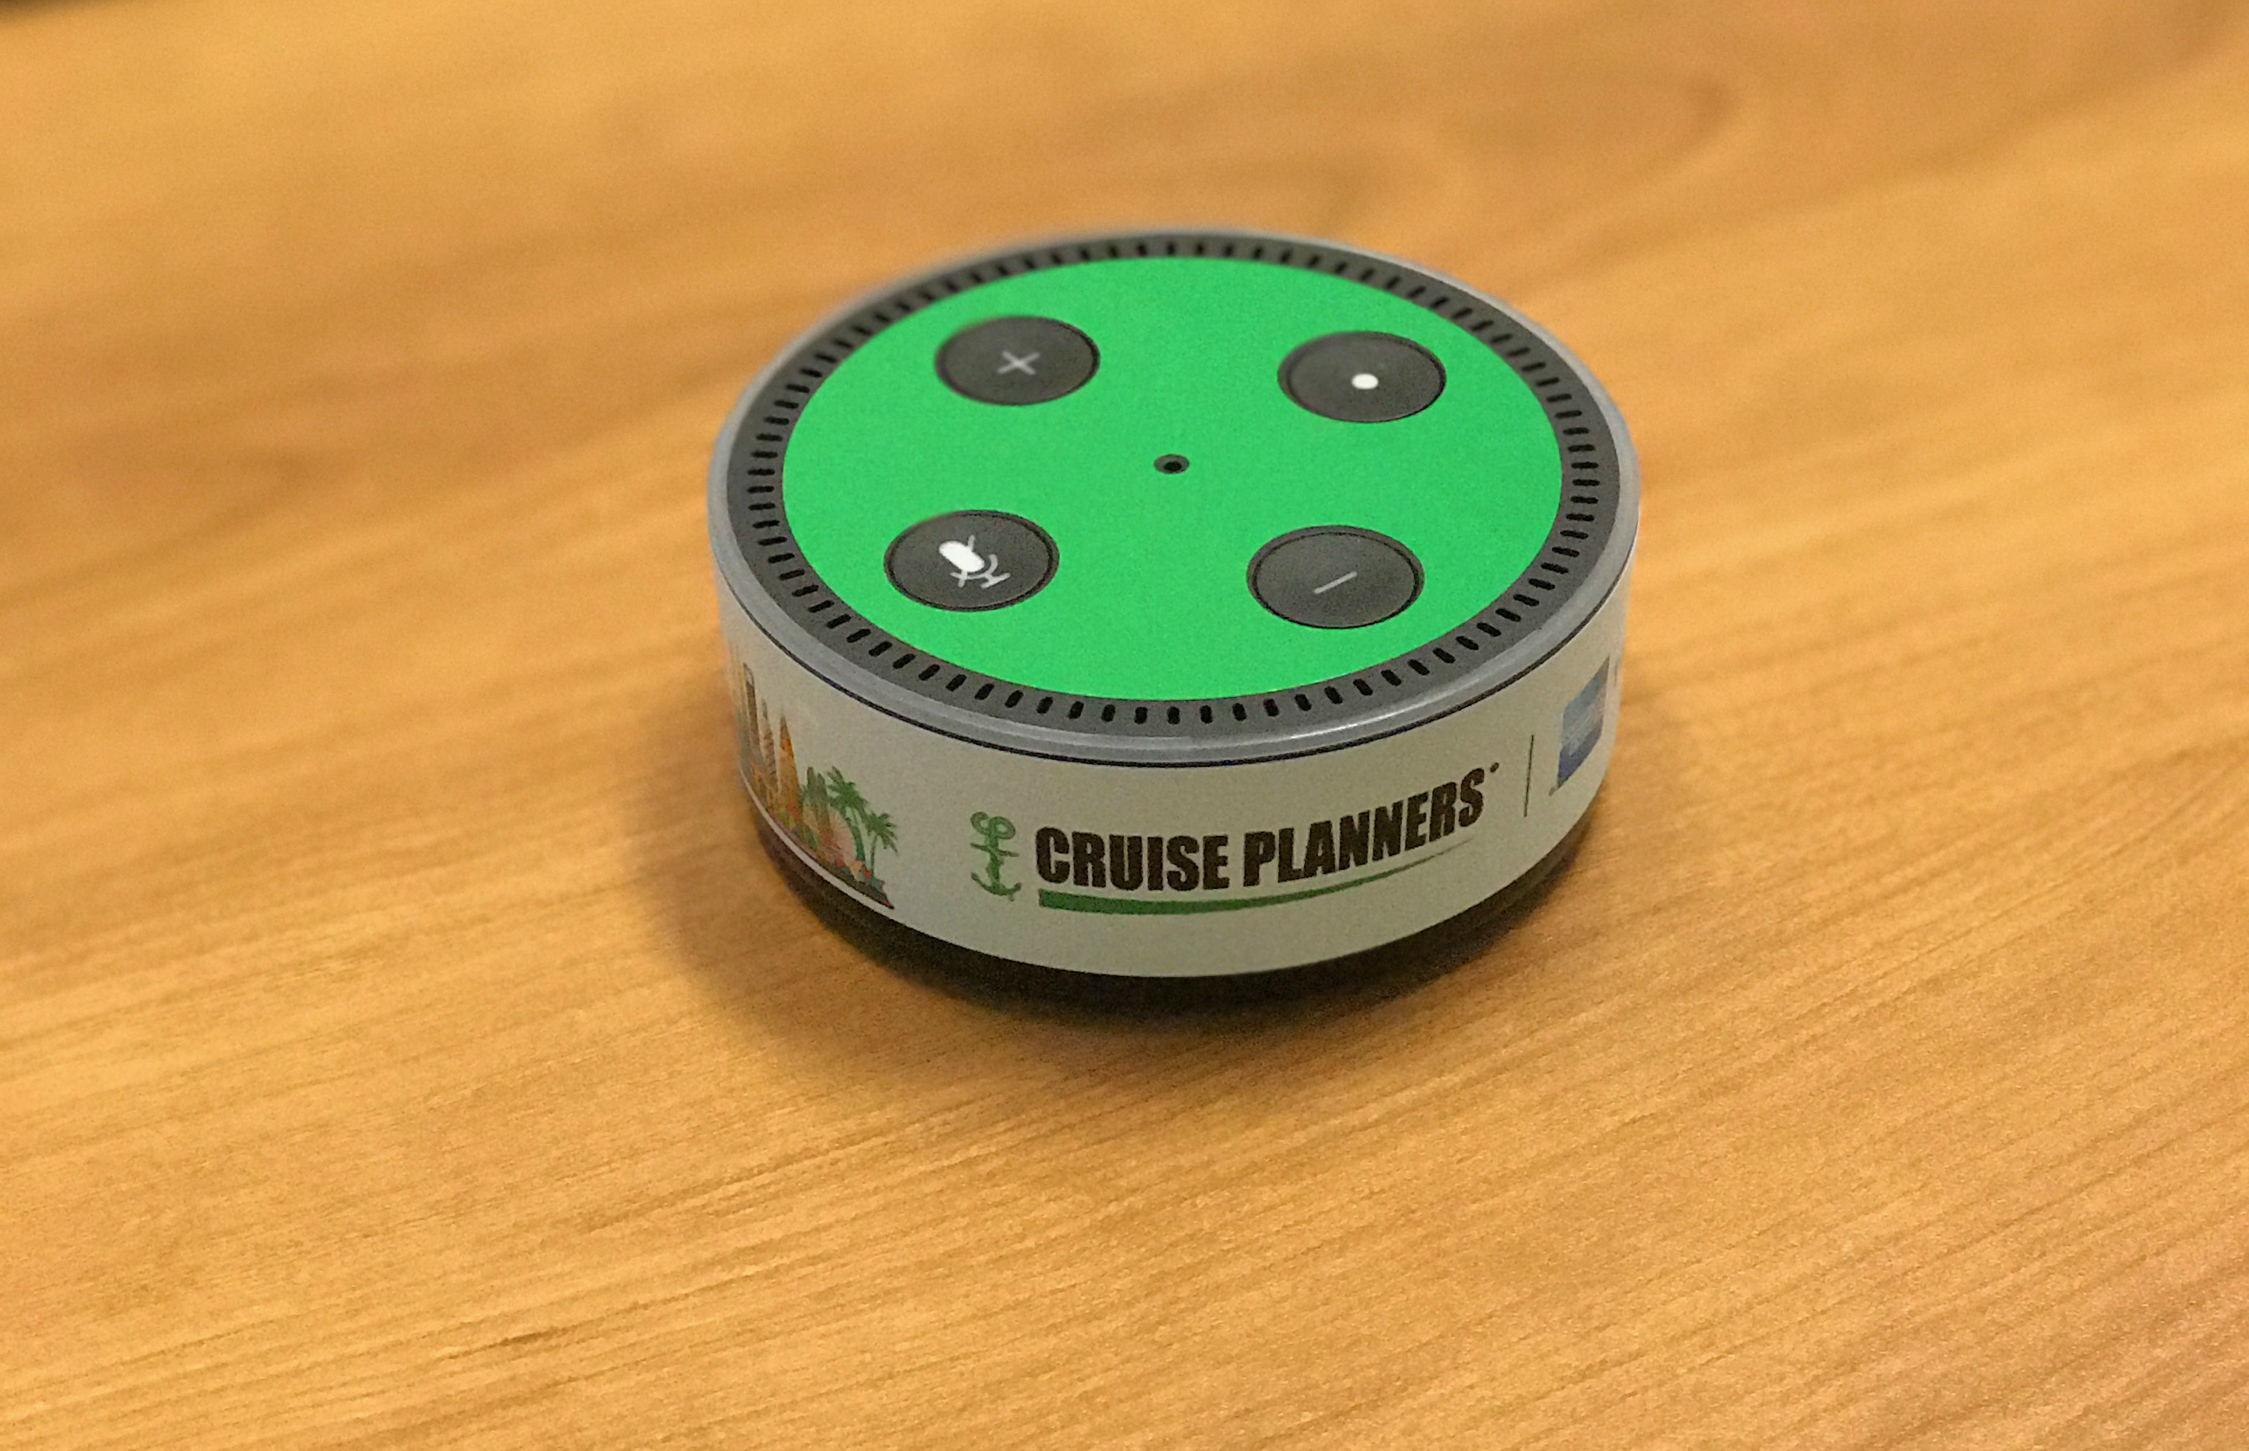 Cruise Planners is the first host travel company to introduce artificial intelligence with two Alexa Skills exclusive to its agents and their clients.